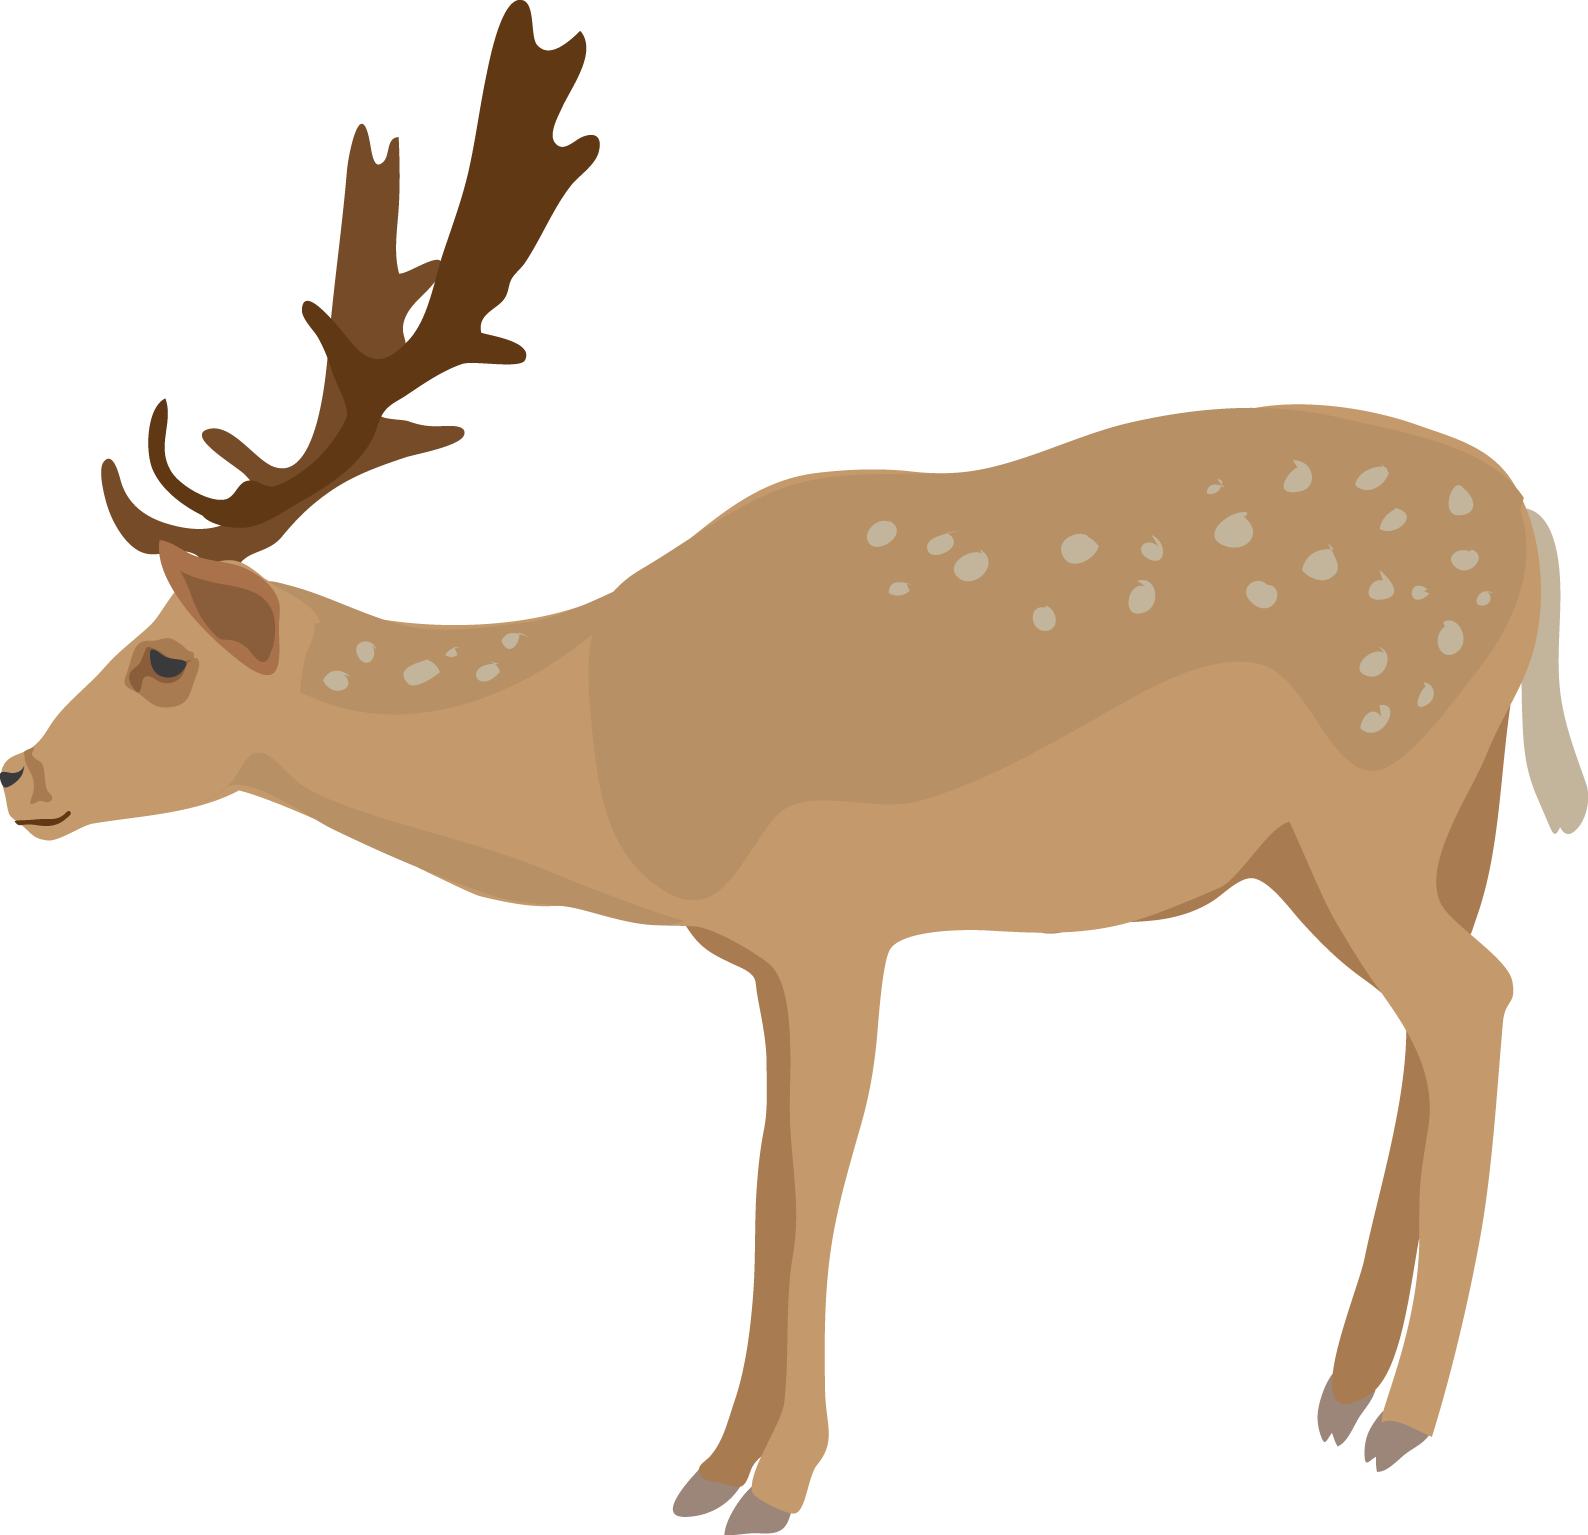  collection of transparent. Deer clipart sika deer